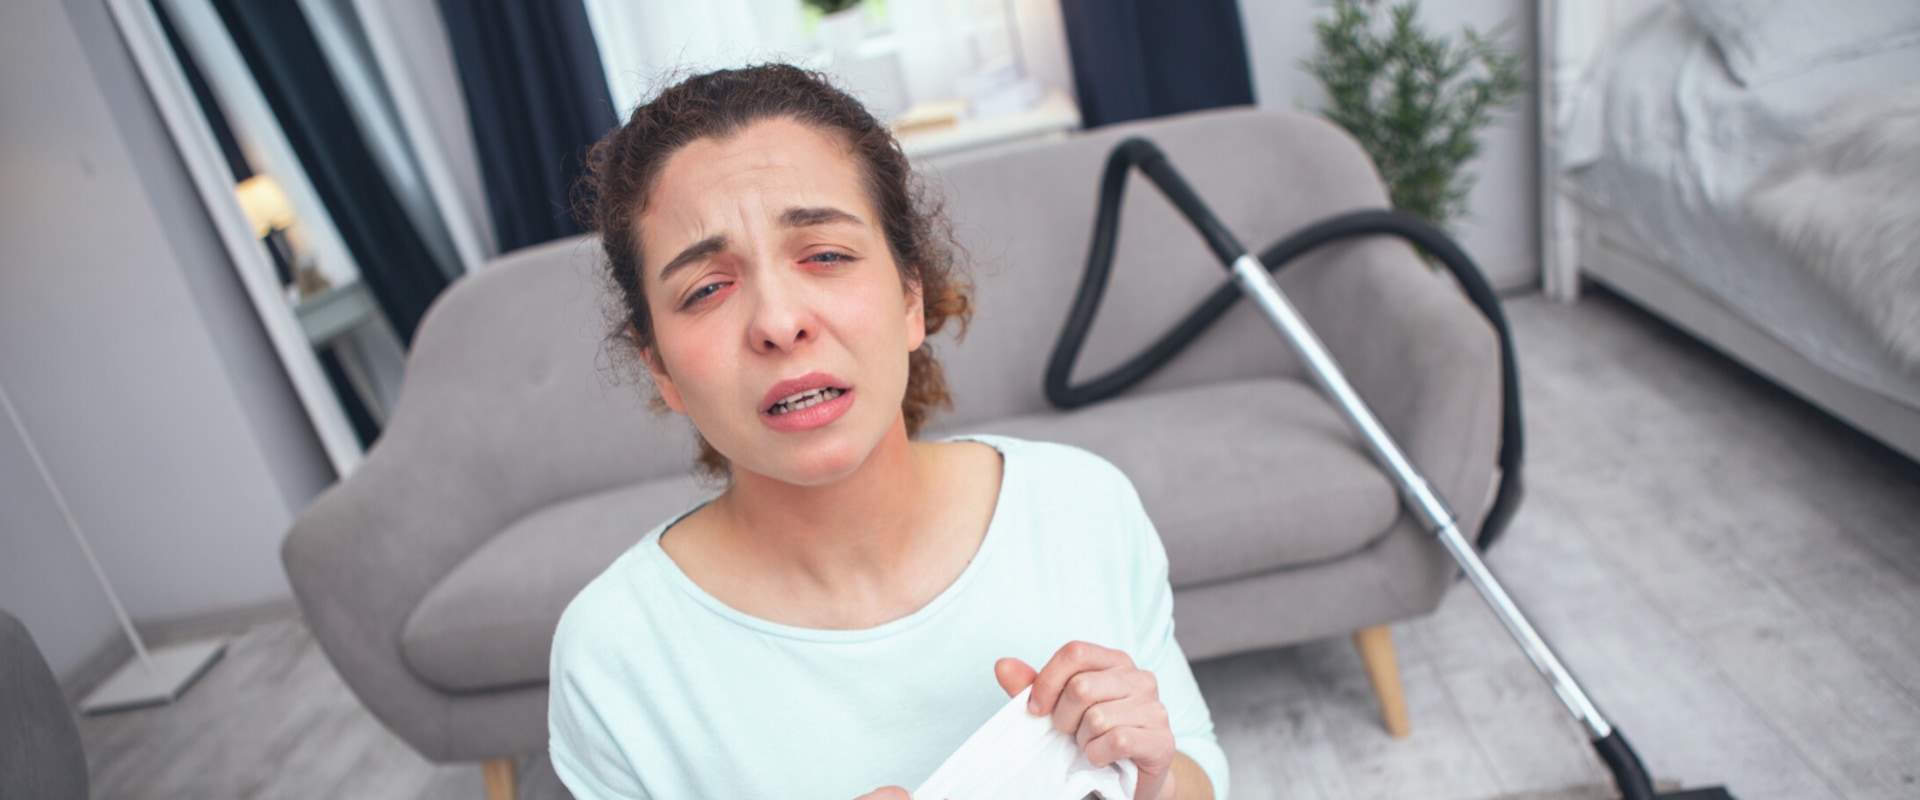 Can Air Filters Make Allergies Worse?